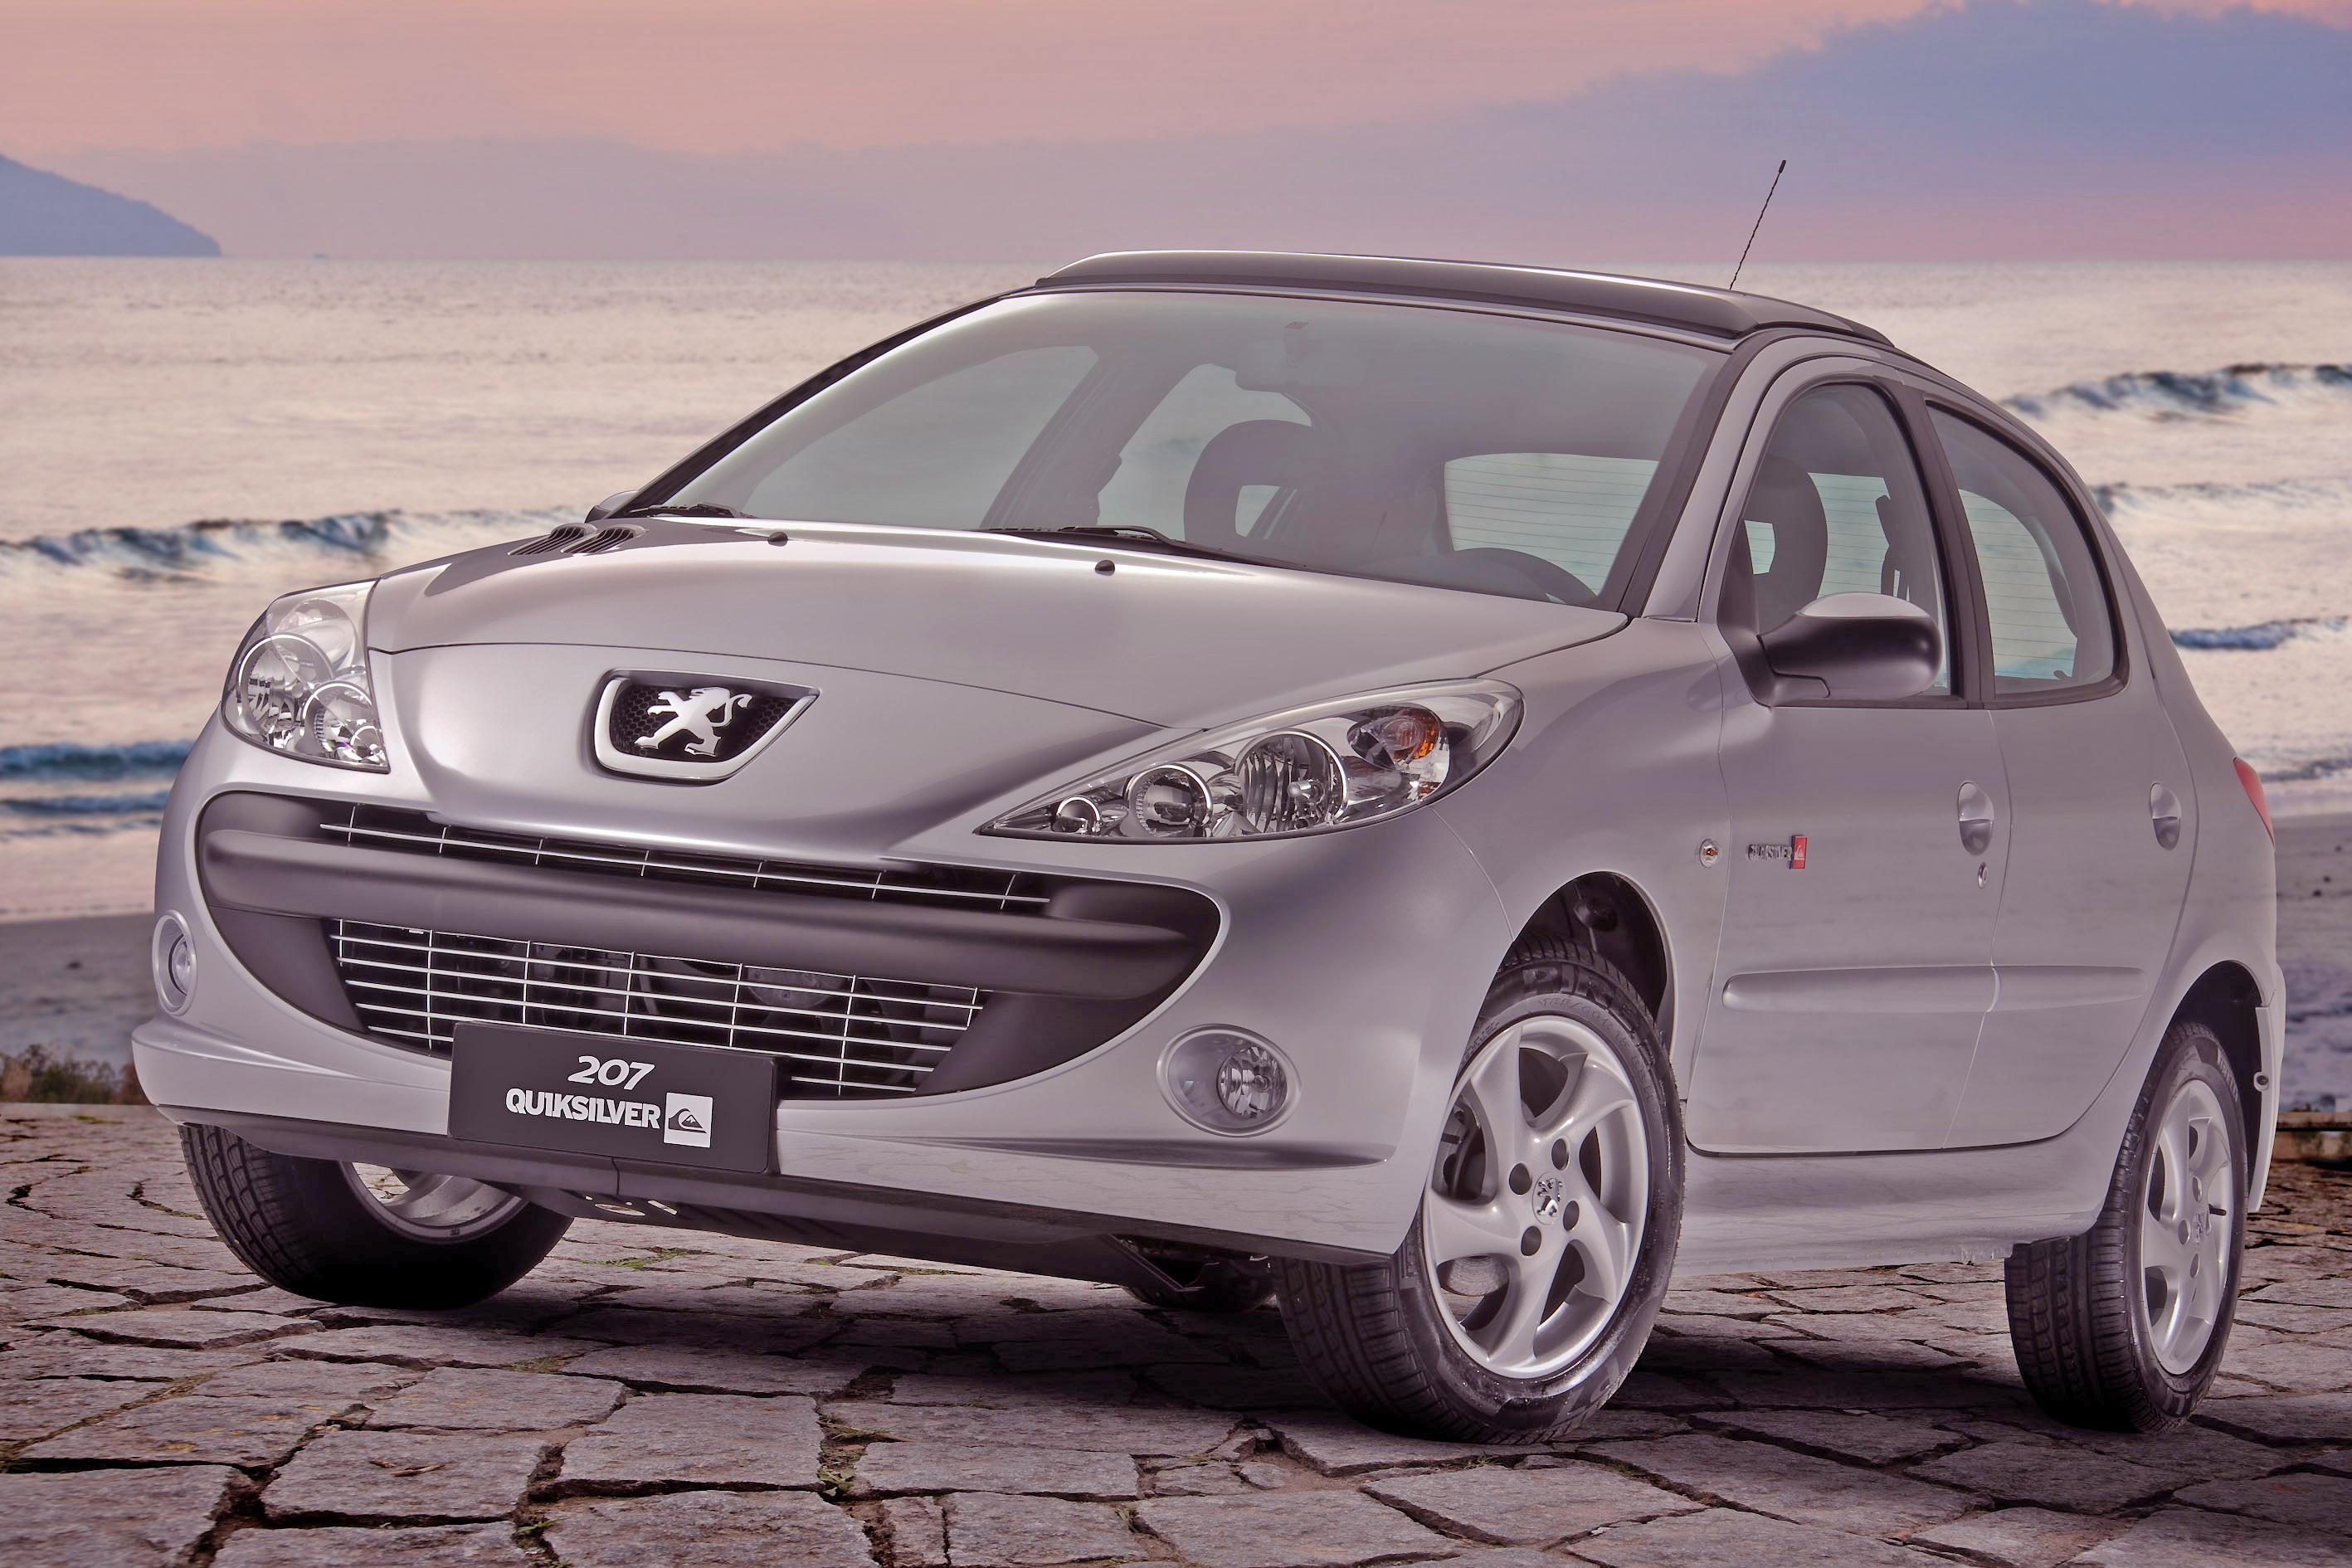 Eye-catching and safe, the new peugeot 207 is leading the way.